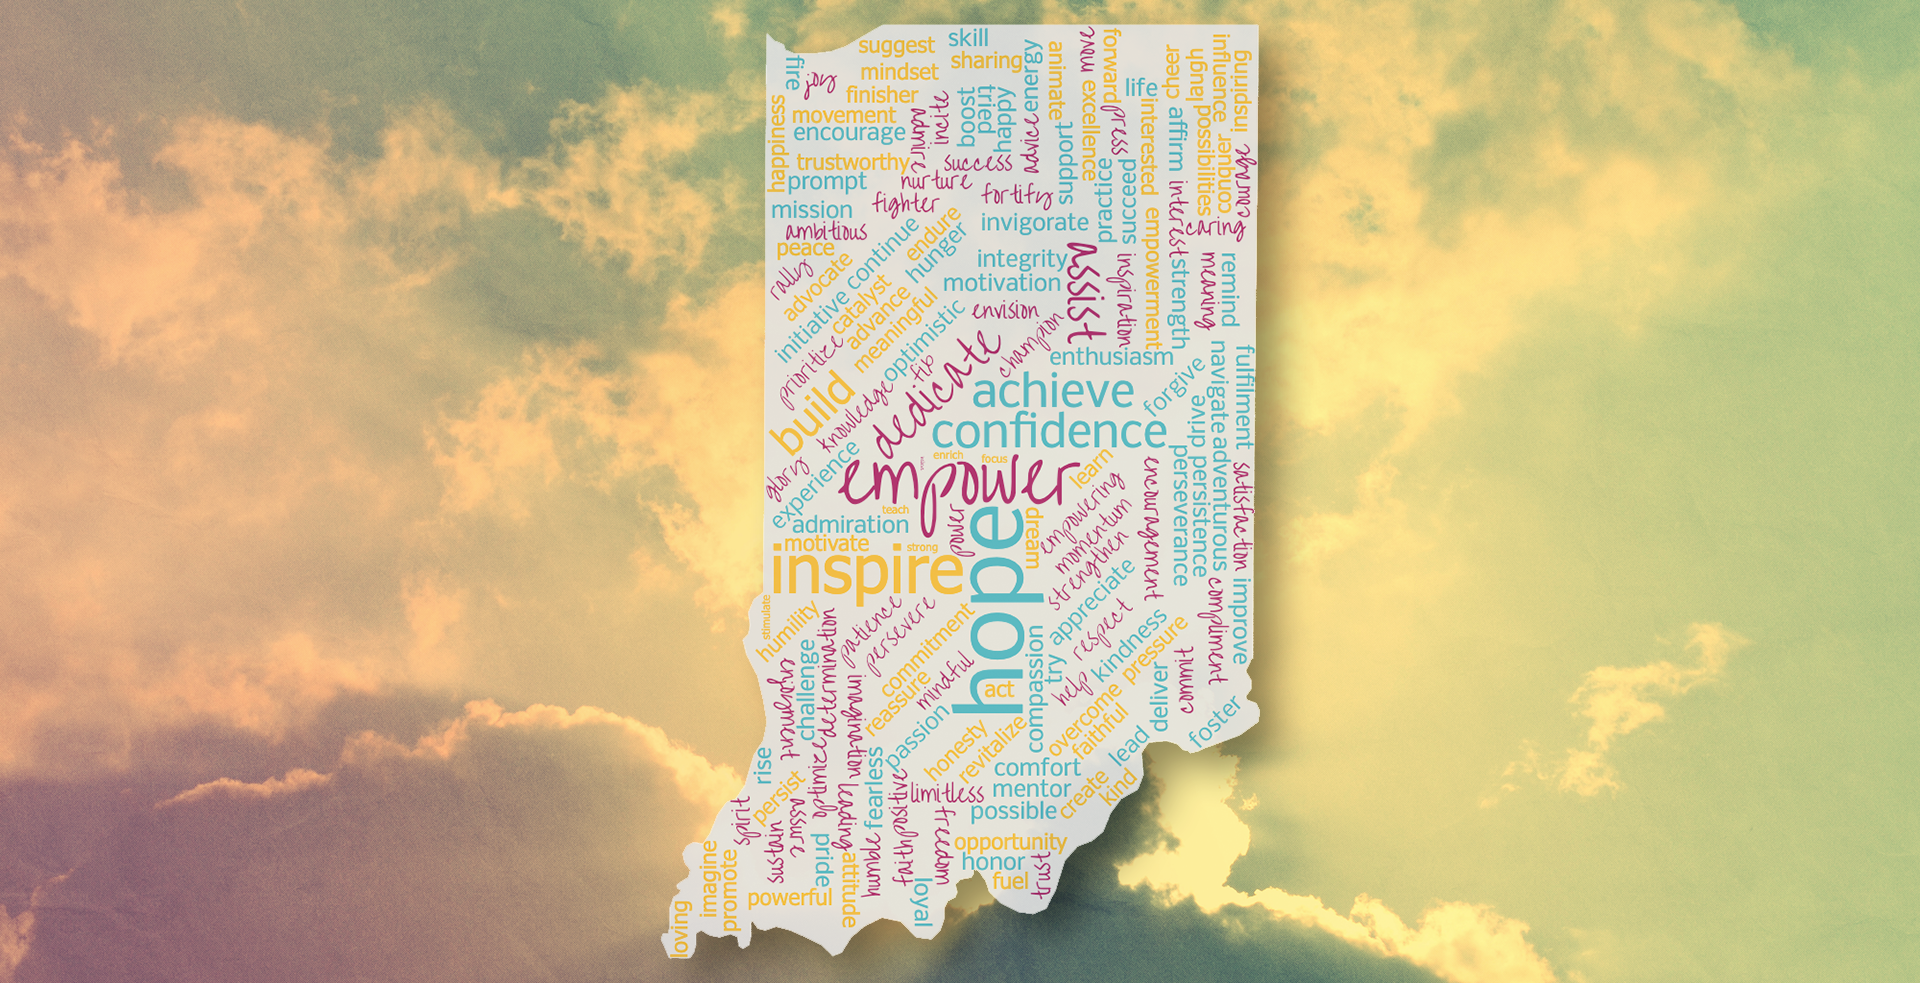 Recovery orgnization - Indiana Recovery Alliance